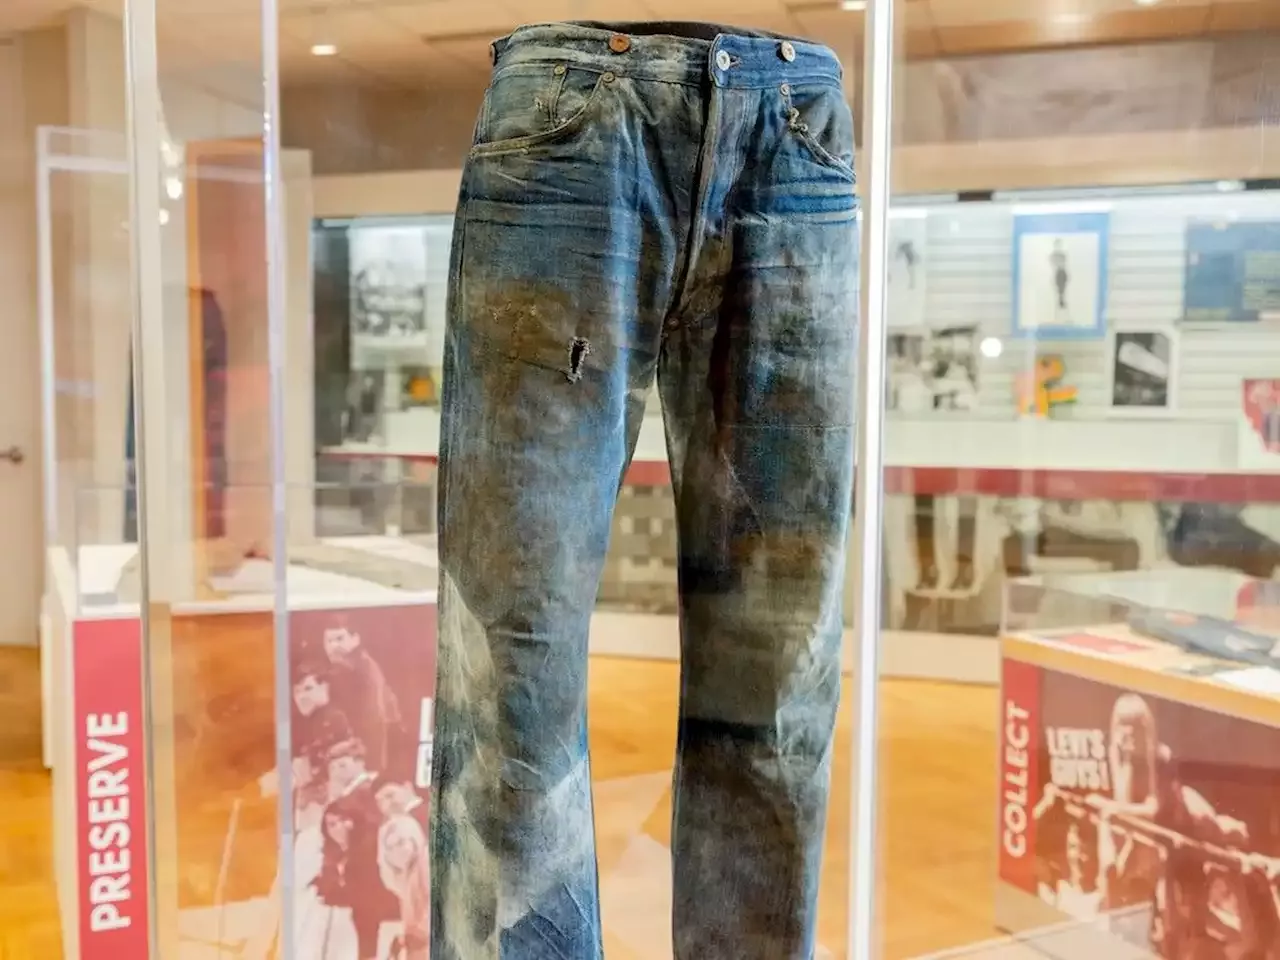 Evolution of an icon: The Levi's 501 turns 150